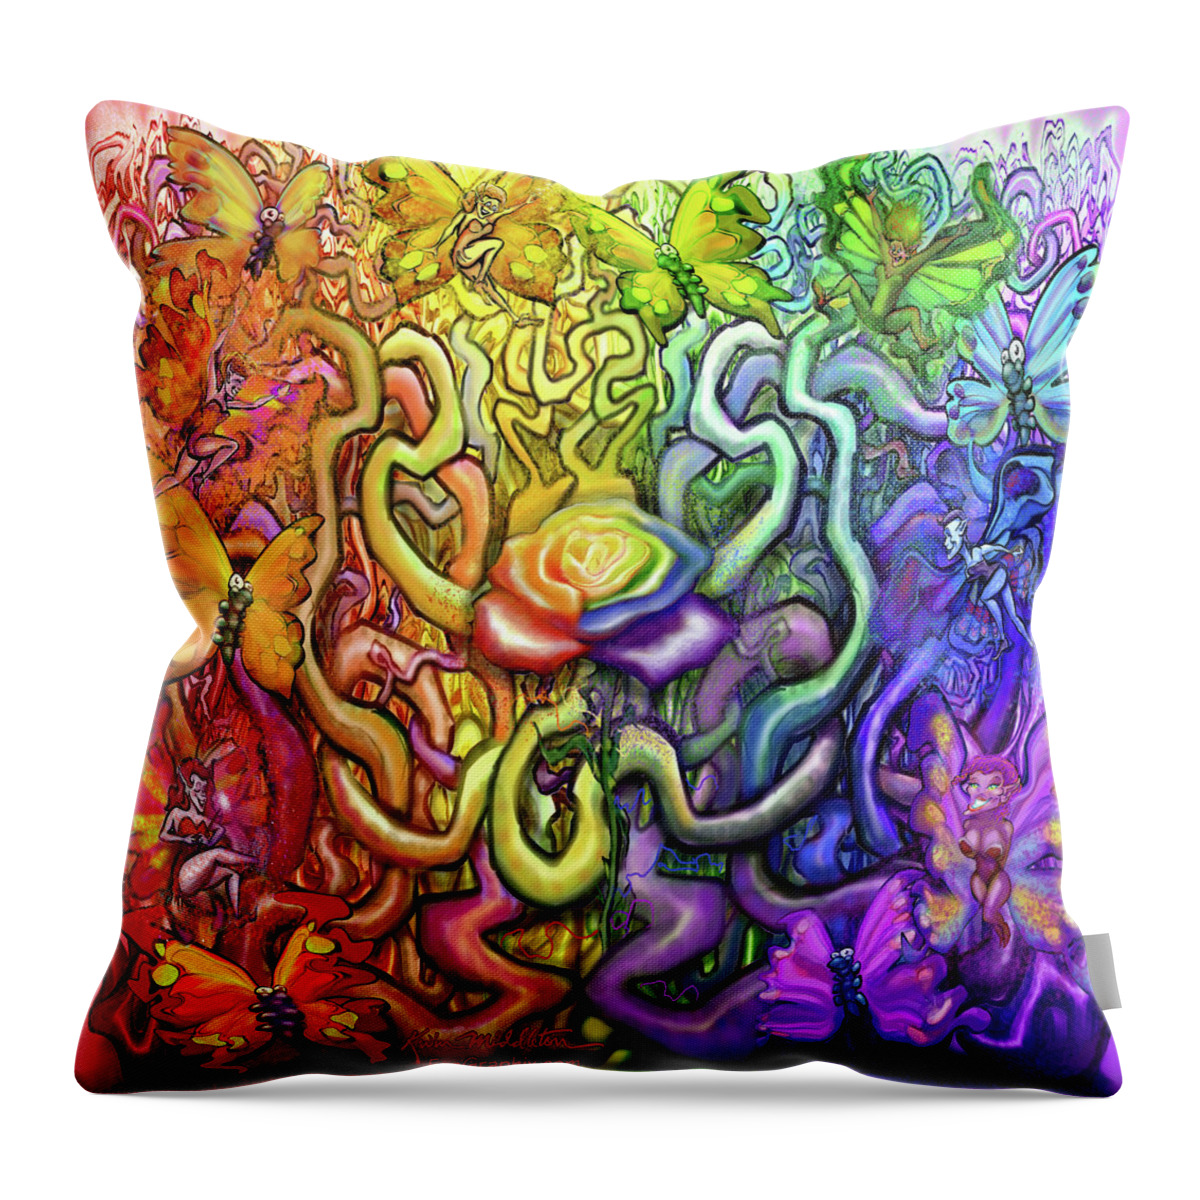 Rainbow Throw Pillow featuring the digital art Interwoven Rainbow Magic by Kevin Middleton